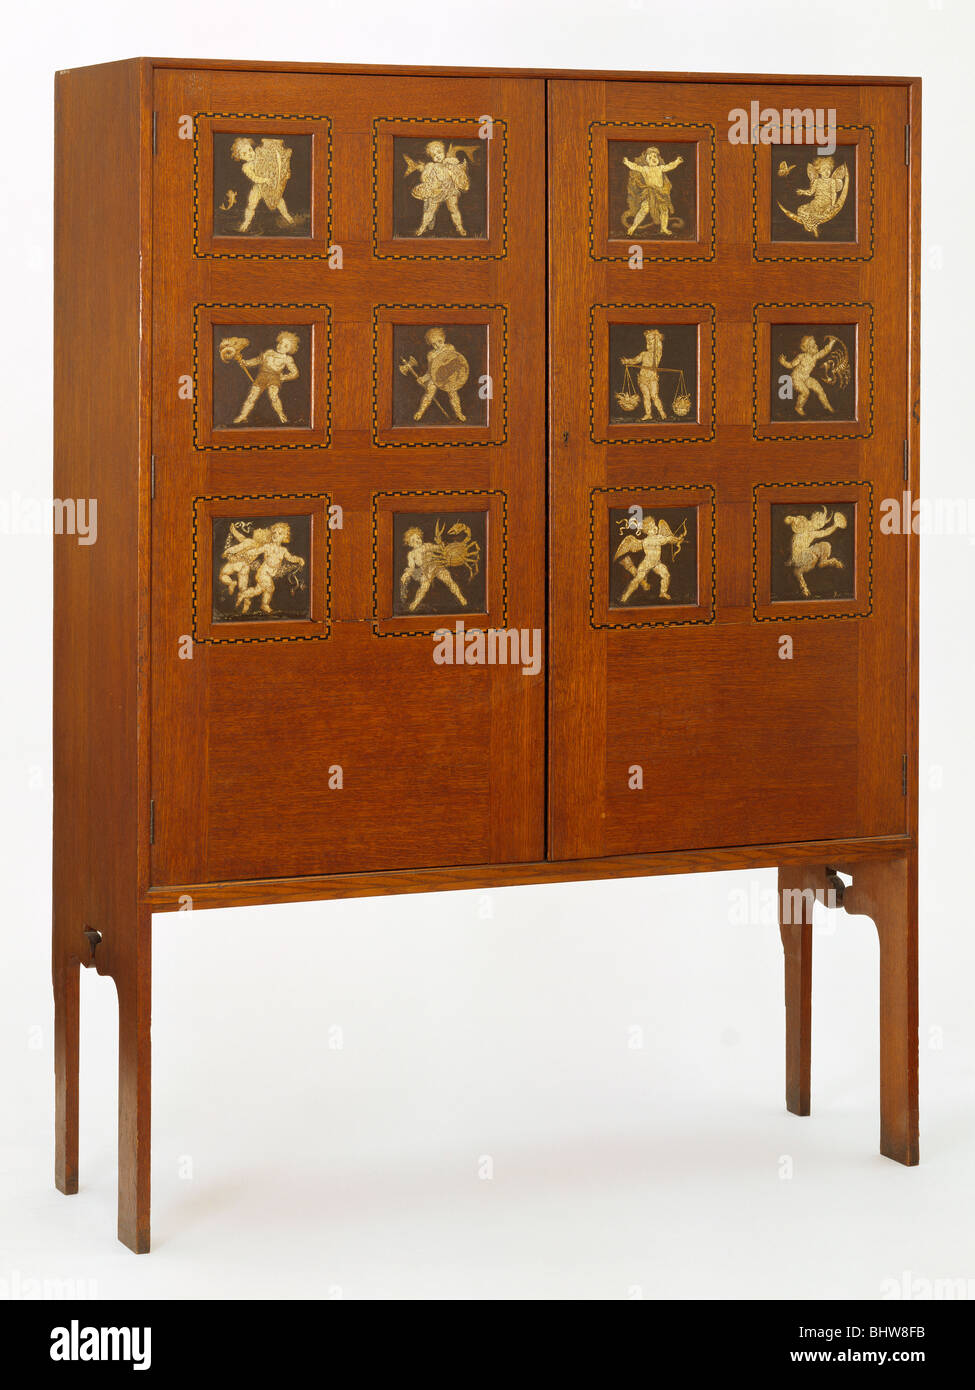 Cabinet, by Lewis Foreman Day. England, 1888 Stock Photo